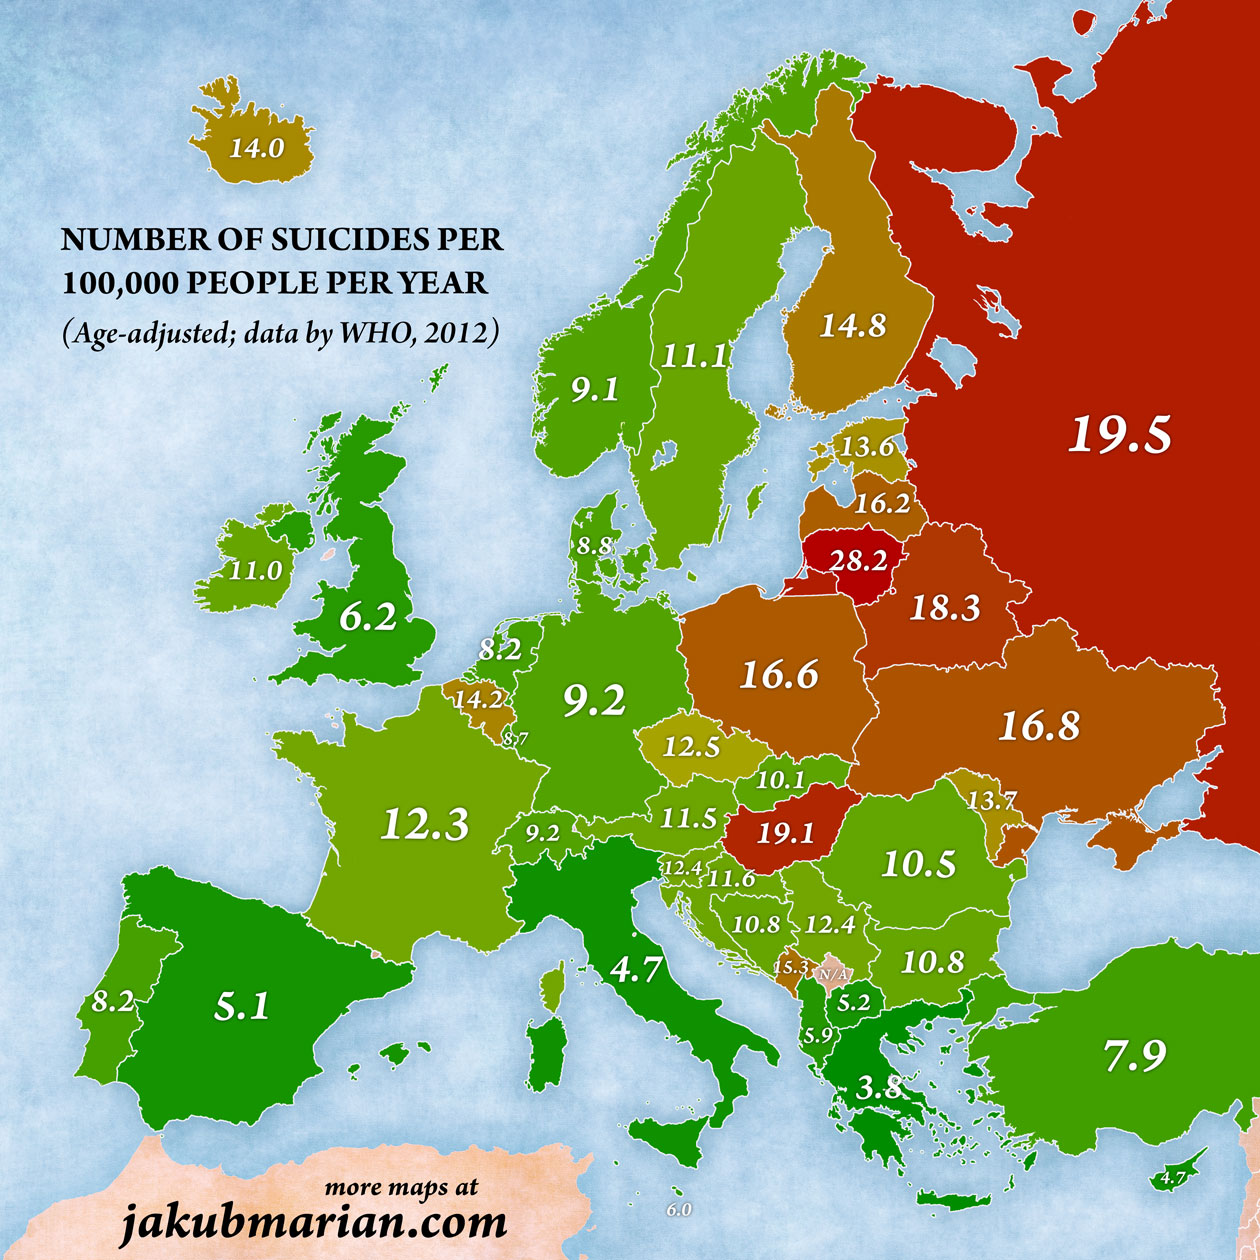 Suicides in Europe